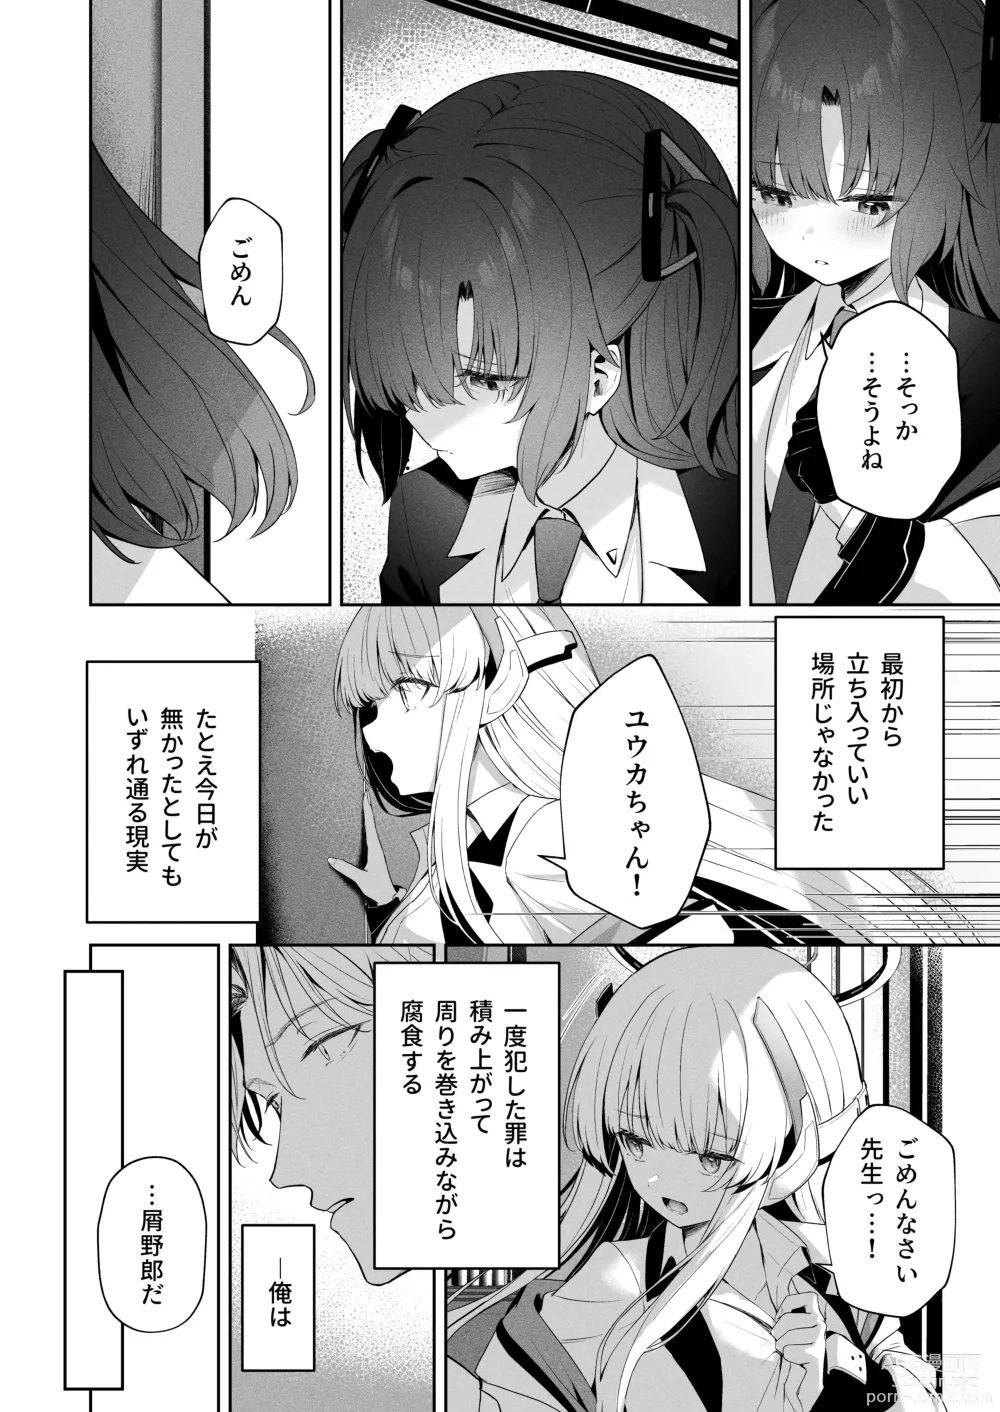 Page 3 of doujinshi Answers